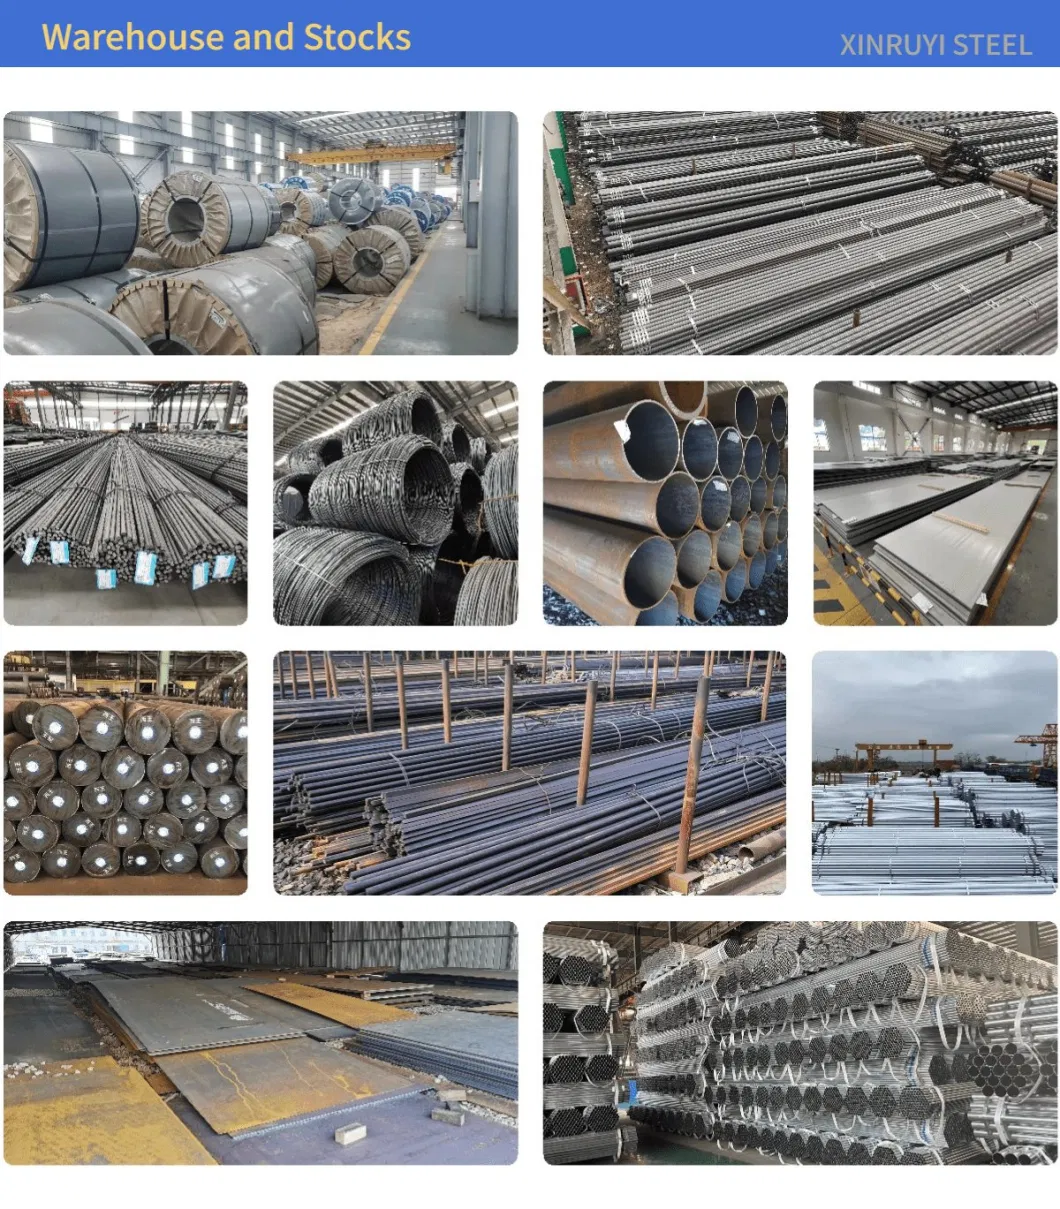 Hot Forged 42CrMo 42CrMo4 20cr 40cr 20crmo Quenched and Tempered Alloy Structure Steel Drill Hollow Bars